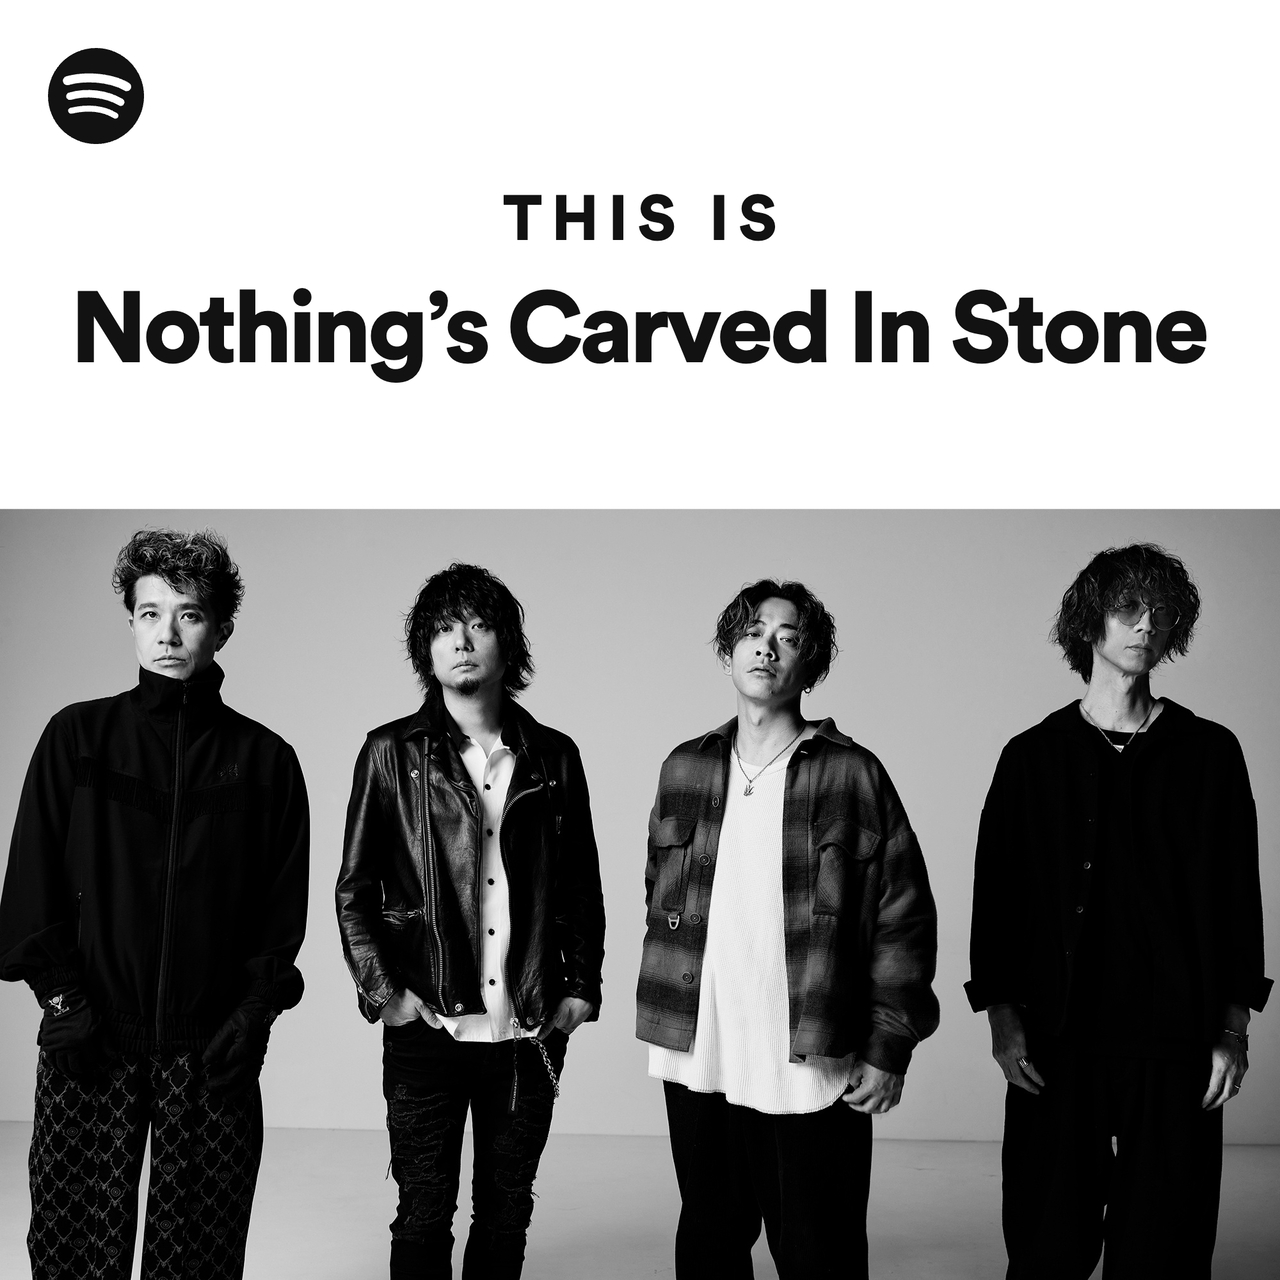 This Is Nothing's Carved In Stone - playlist by Spotify | Spotify